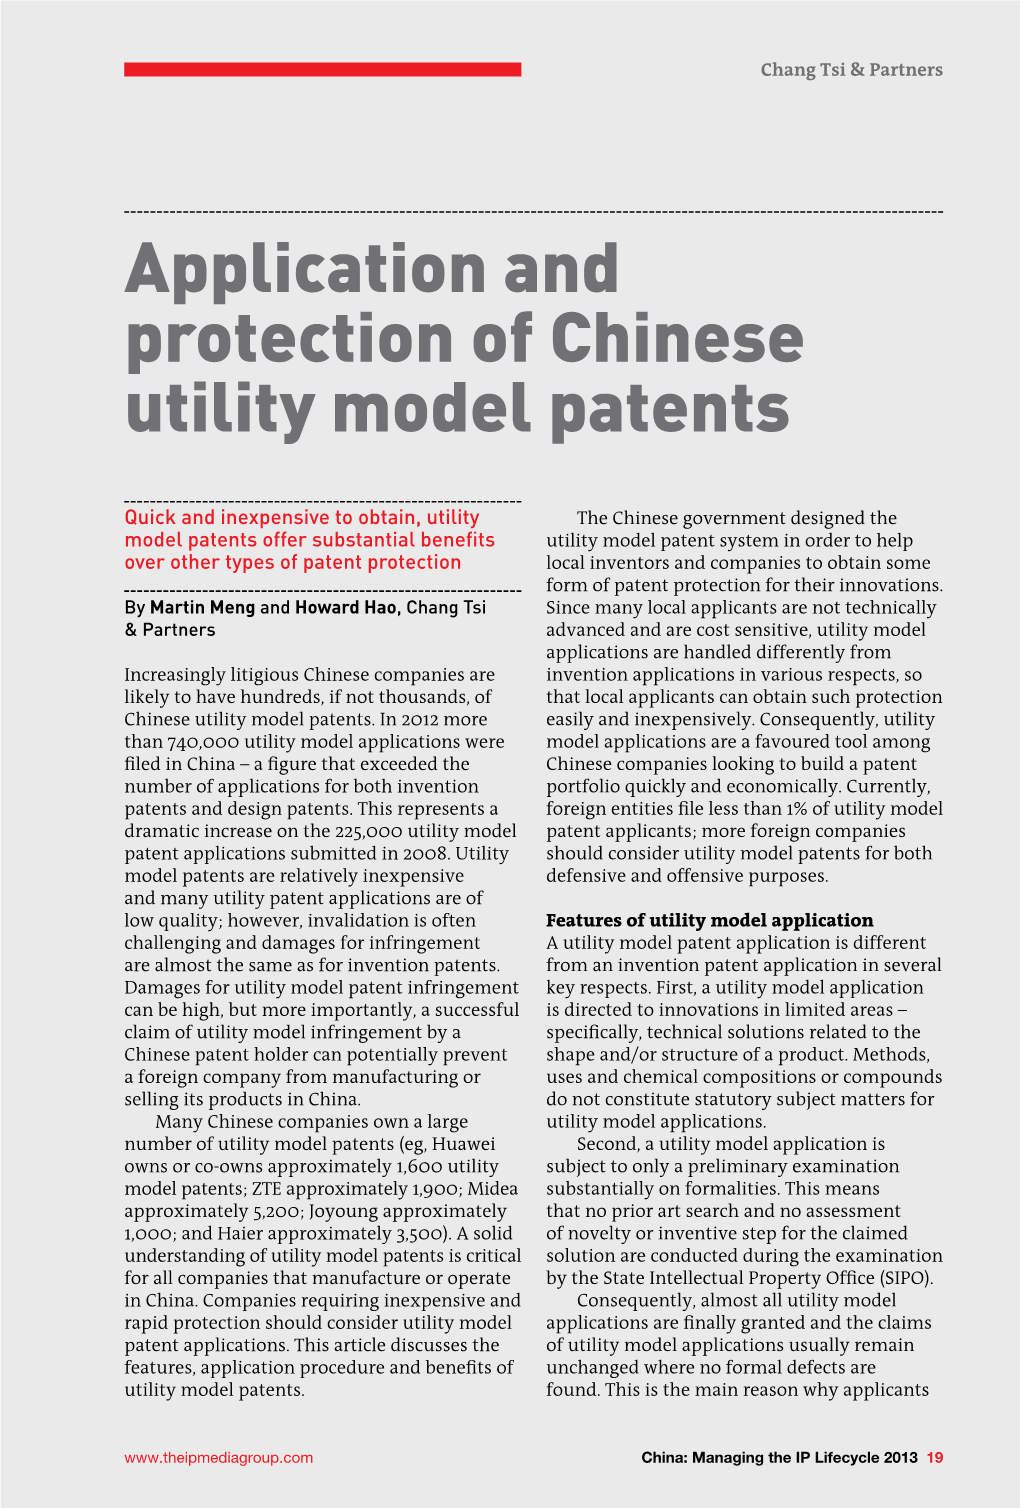 Application and Protection of Chinese Utility Model Patents